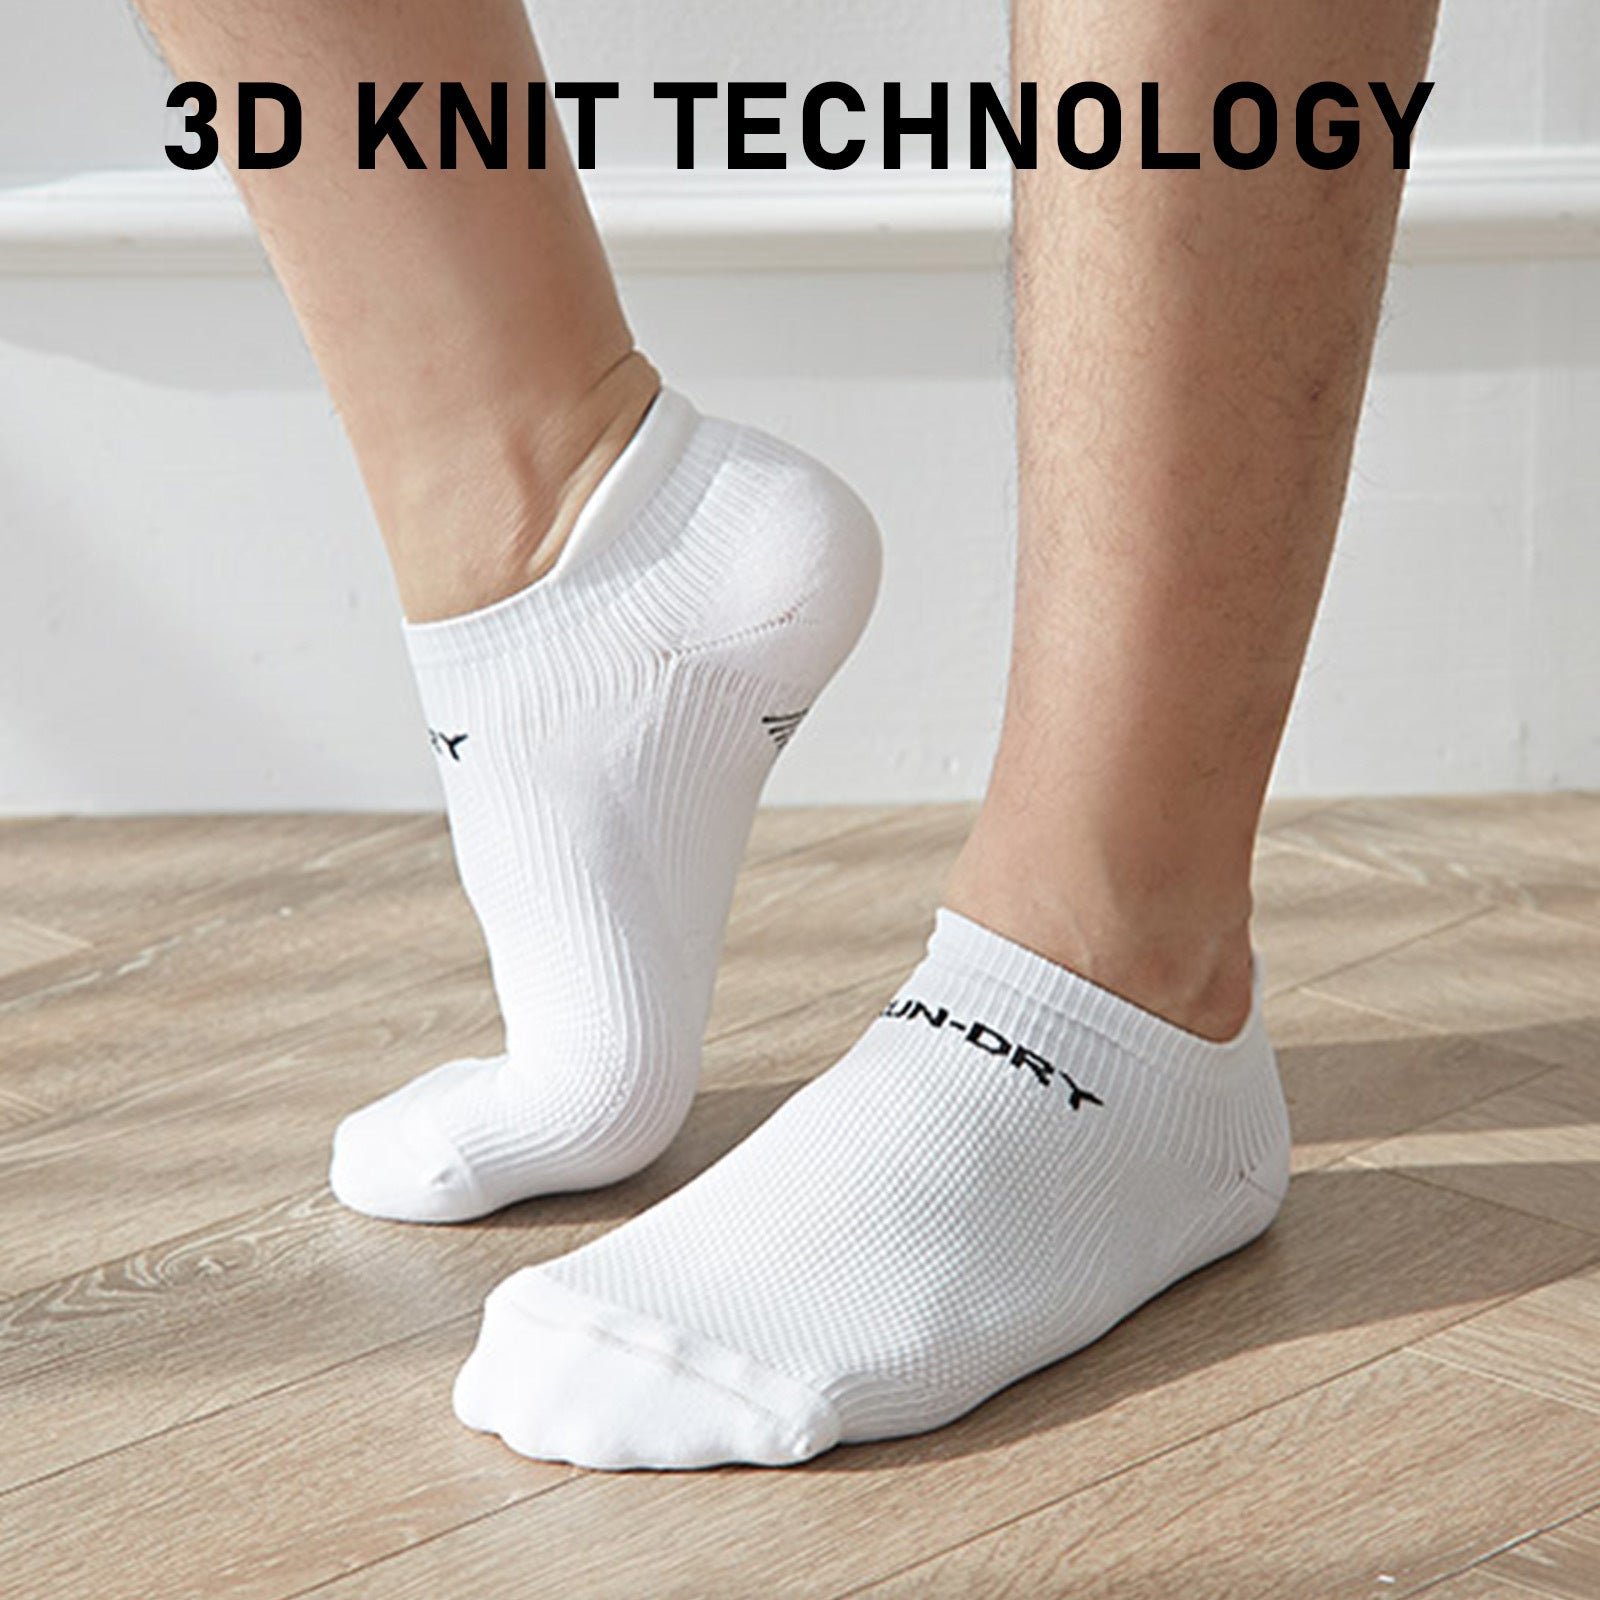 Rexy 4 Pack Medium White Seamless Sport Sneakers Socks Non-Slip Heel Tab from Deals499 at Deals499